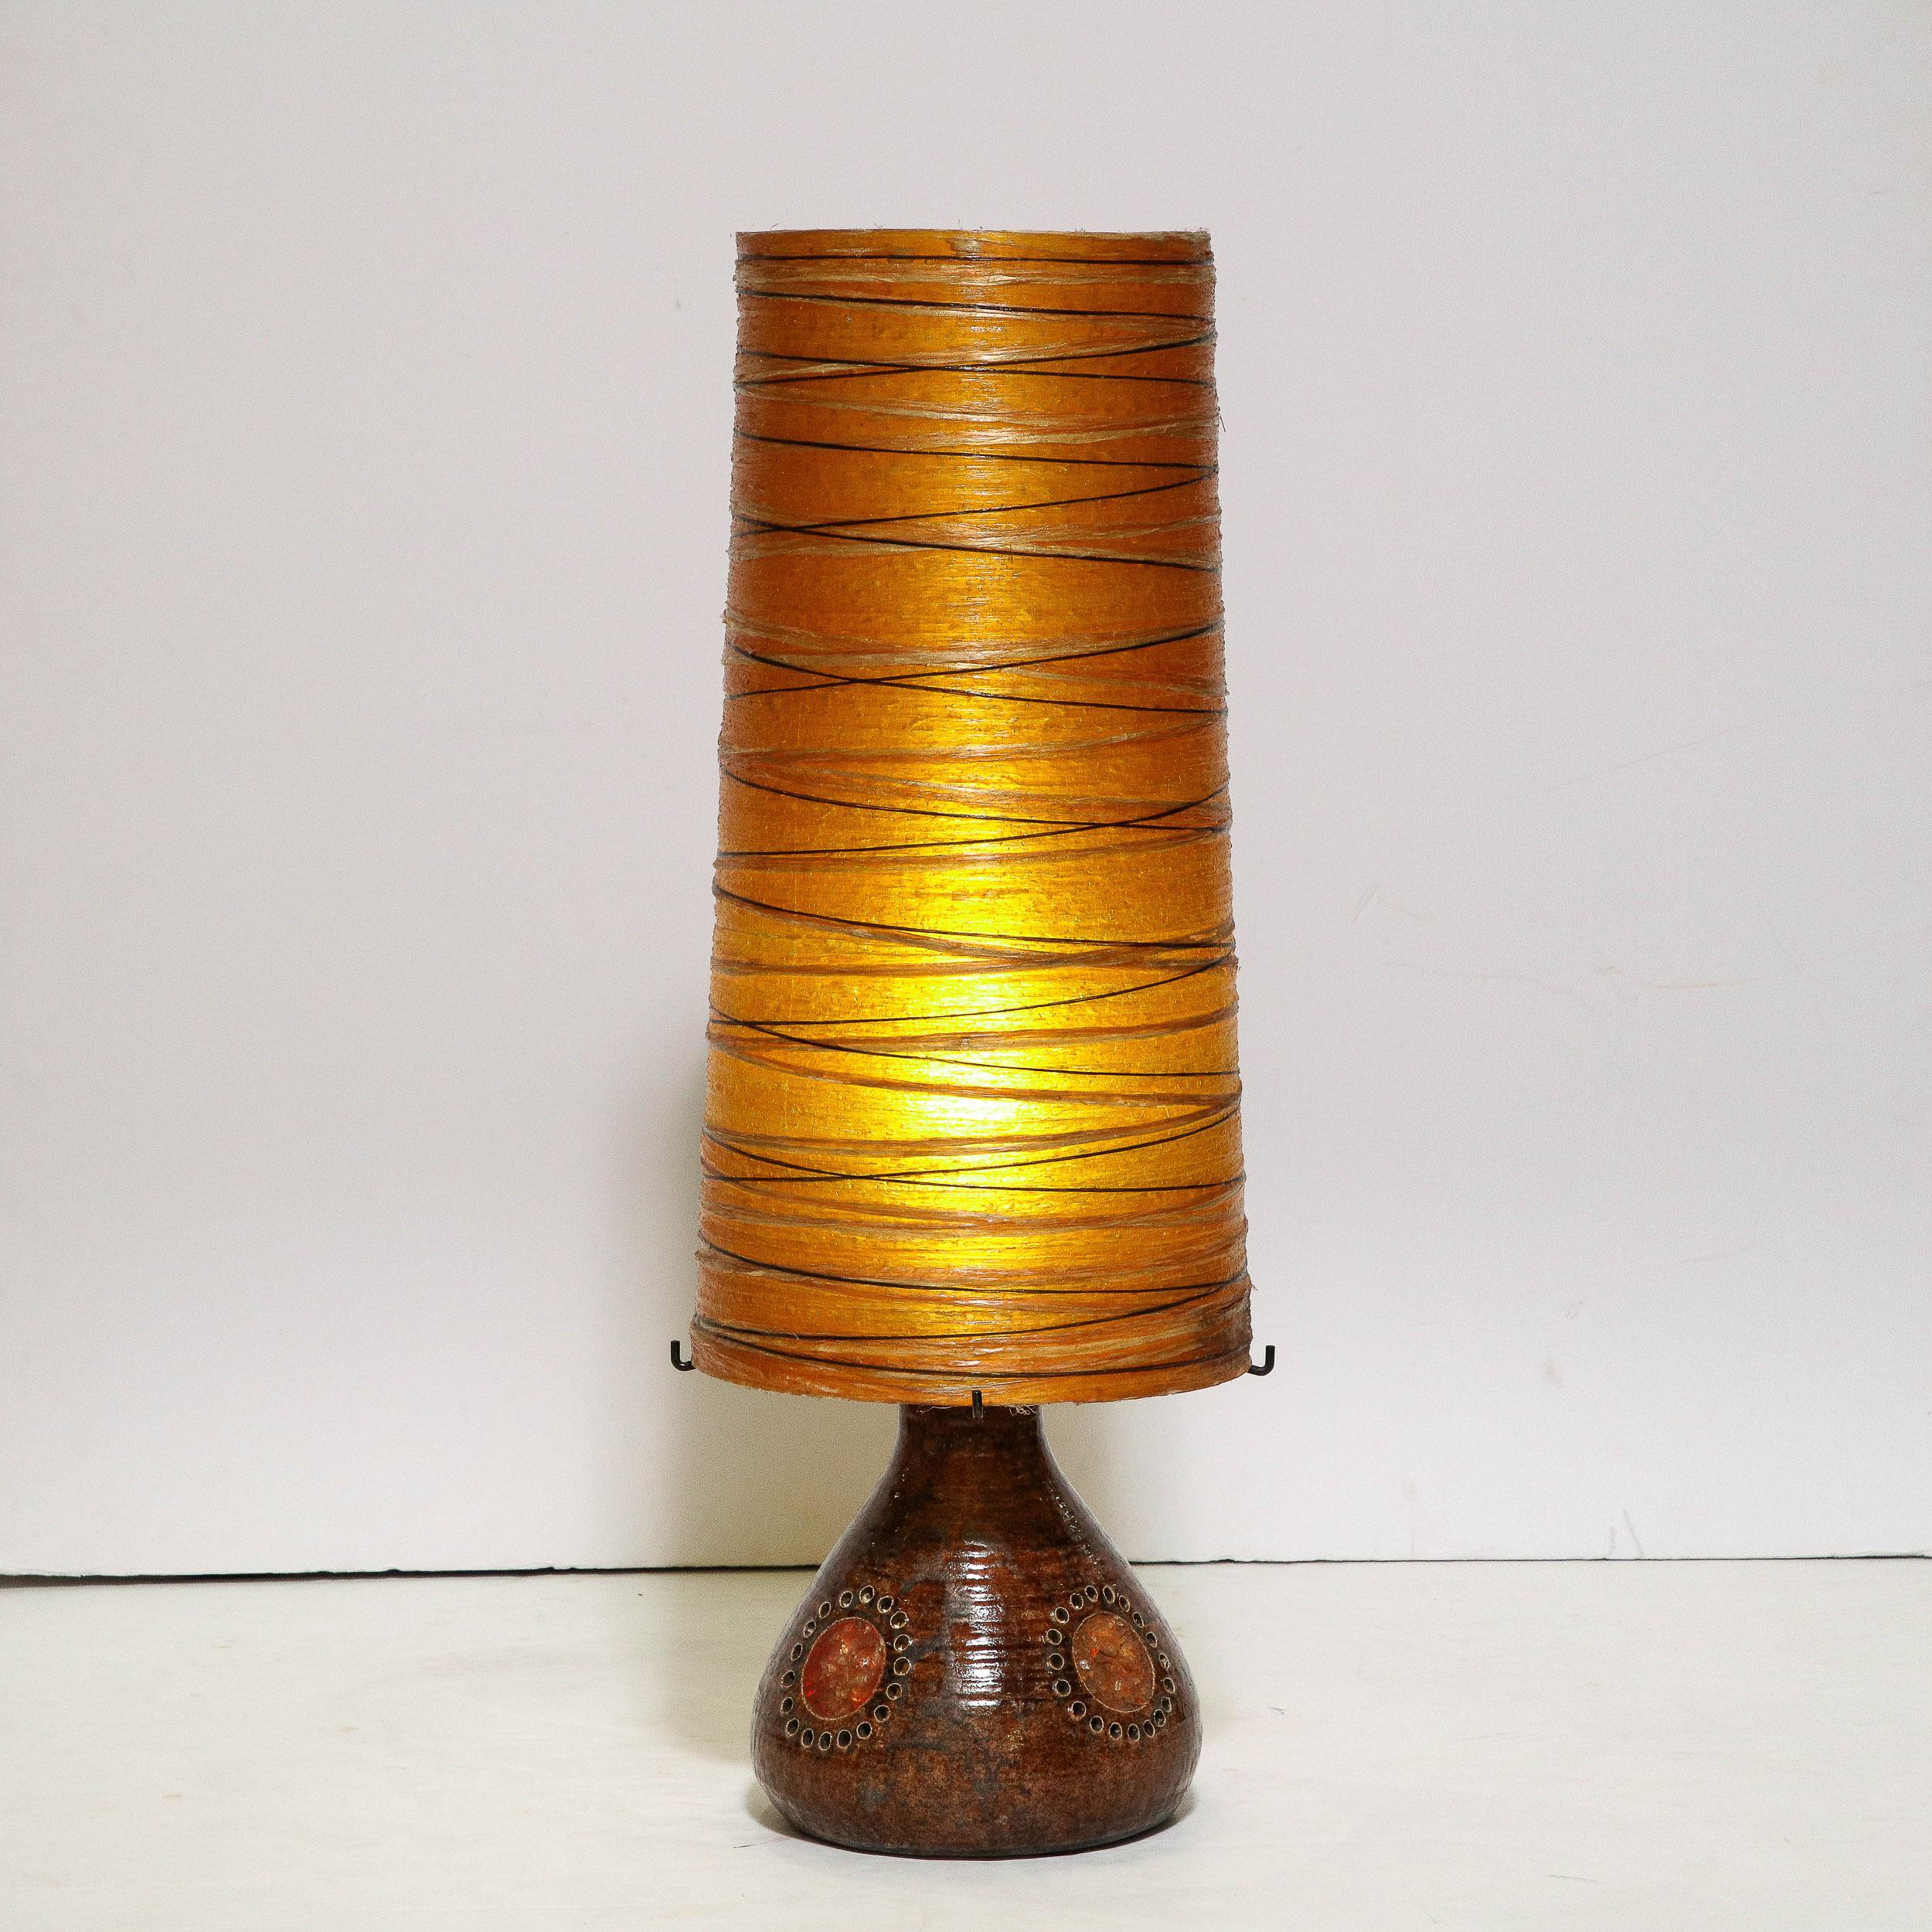 Midcentury Brutalist Ceramic Table Lamp with Horizontally Striated Resin Shade In Excellent Condition For Sale In New York, NY